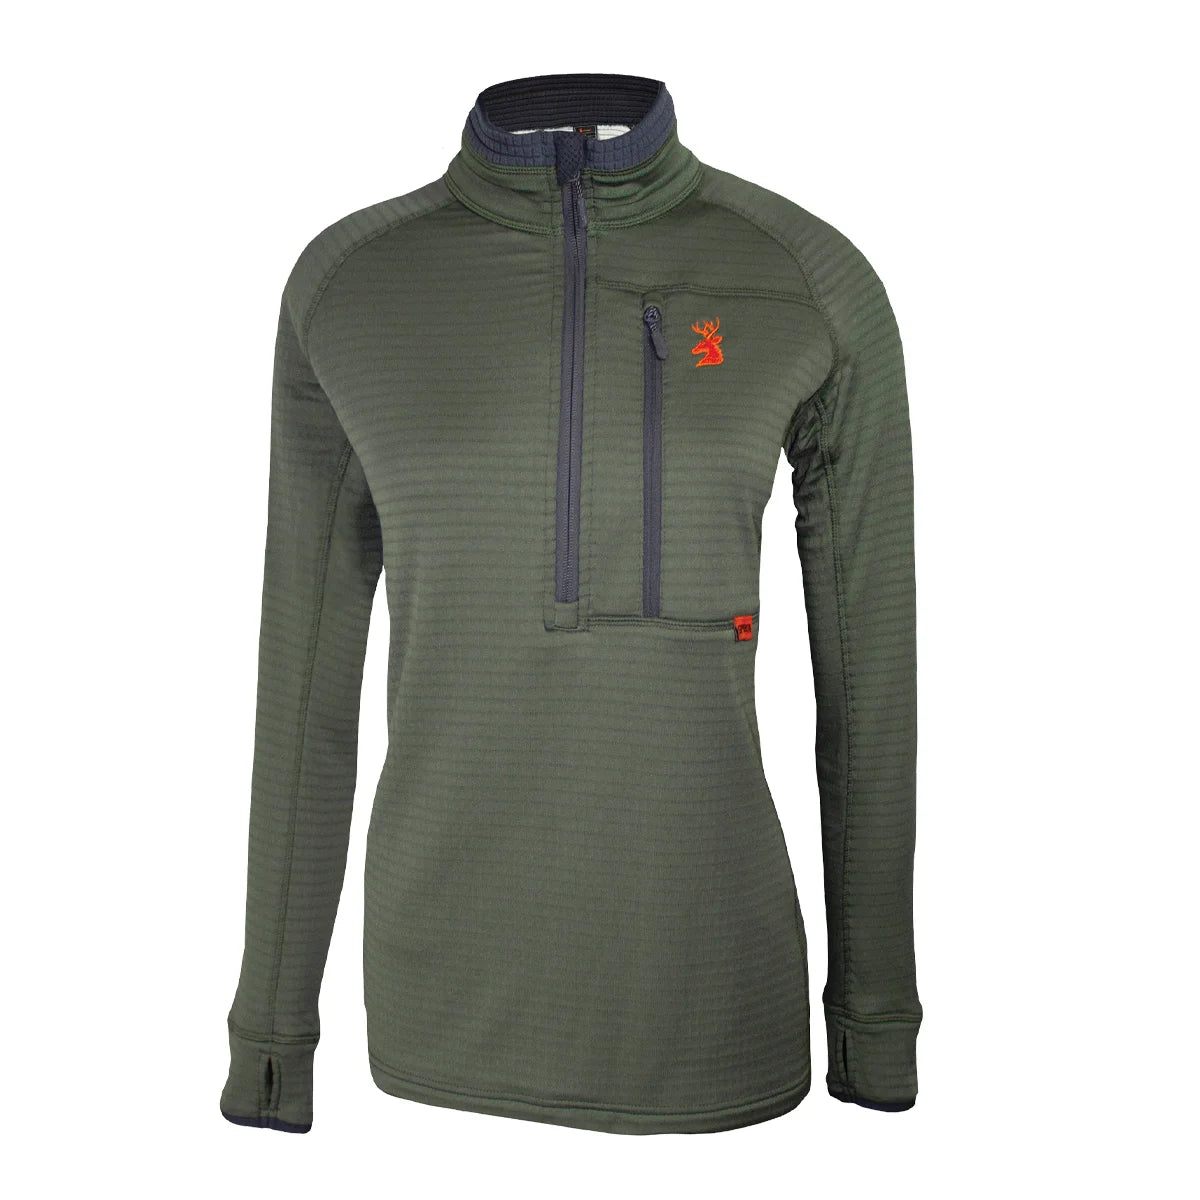 Spika Womens Gridfleece Top - XS / OLIVE - Mansfield Hunting & Fishing - Products to prepare for Corona Virus